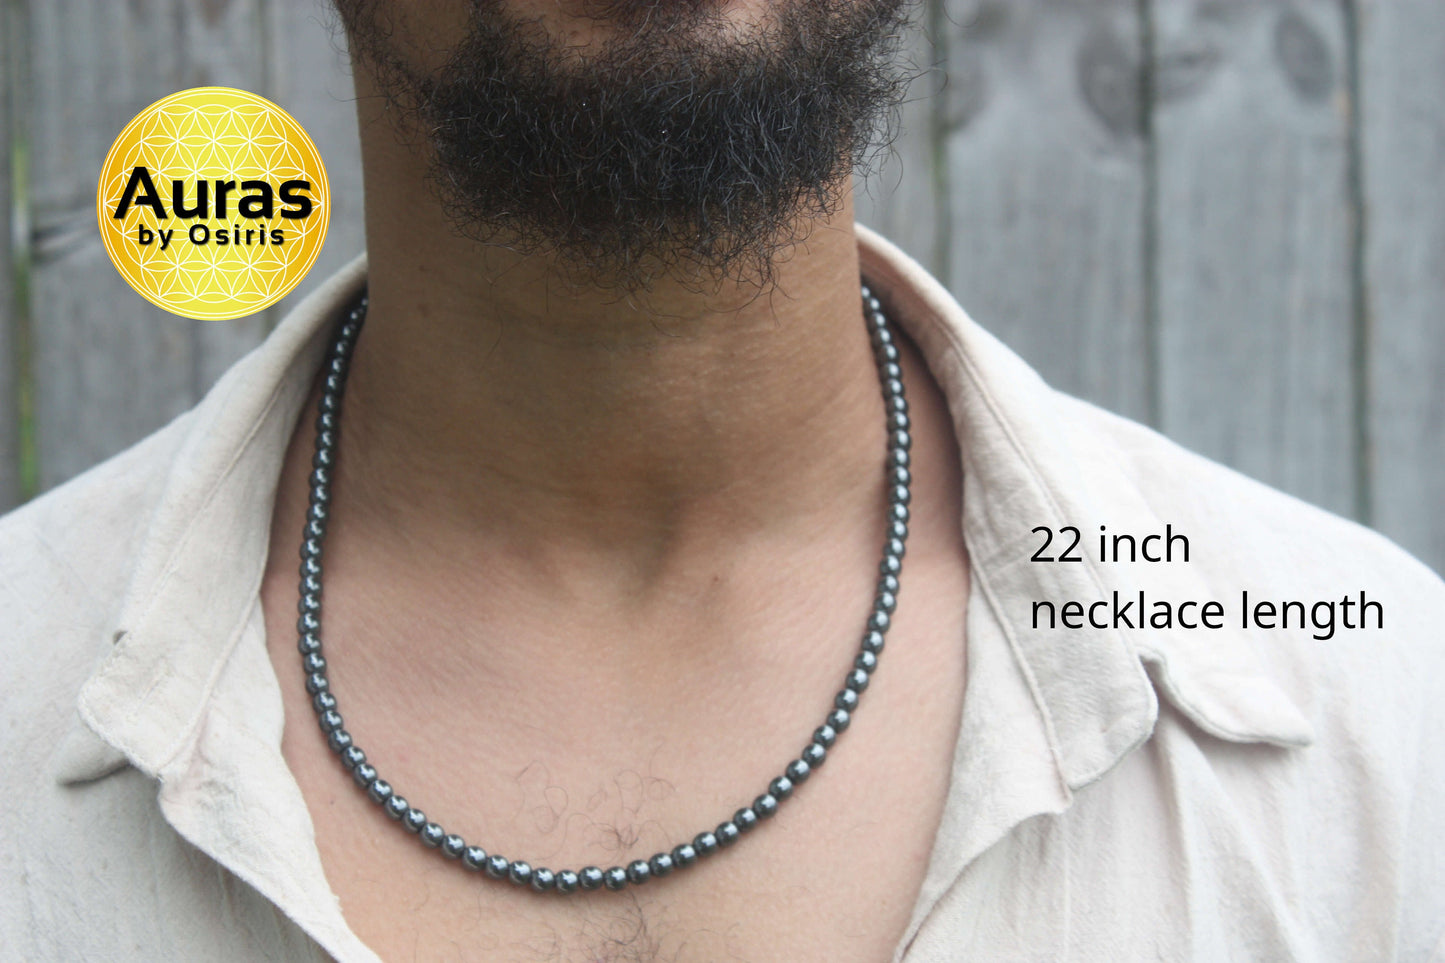 6mm Hematite Necklace - Protection Jewelry - Grounding Stones - Necklaces for Women/Men - Healing Crystals Neckless with Magnetic clasp